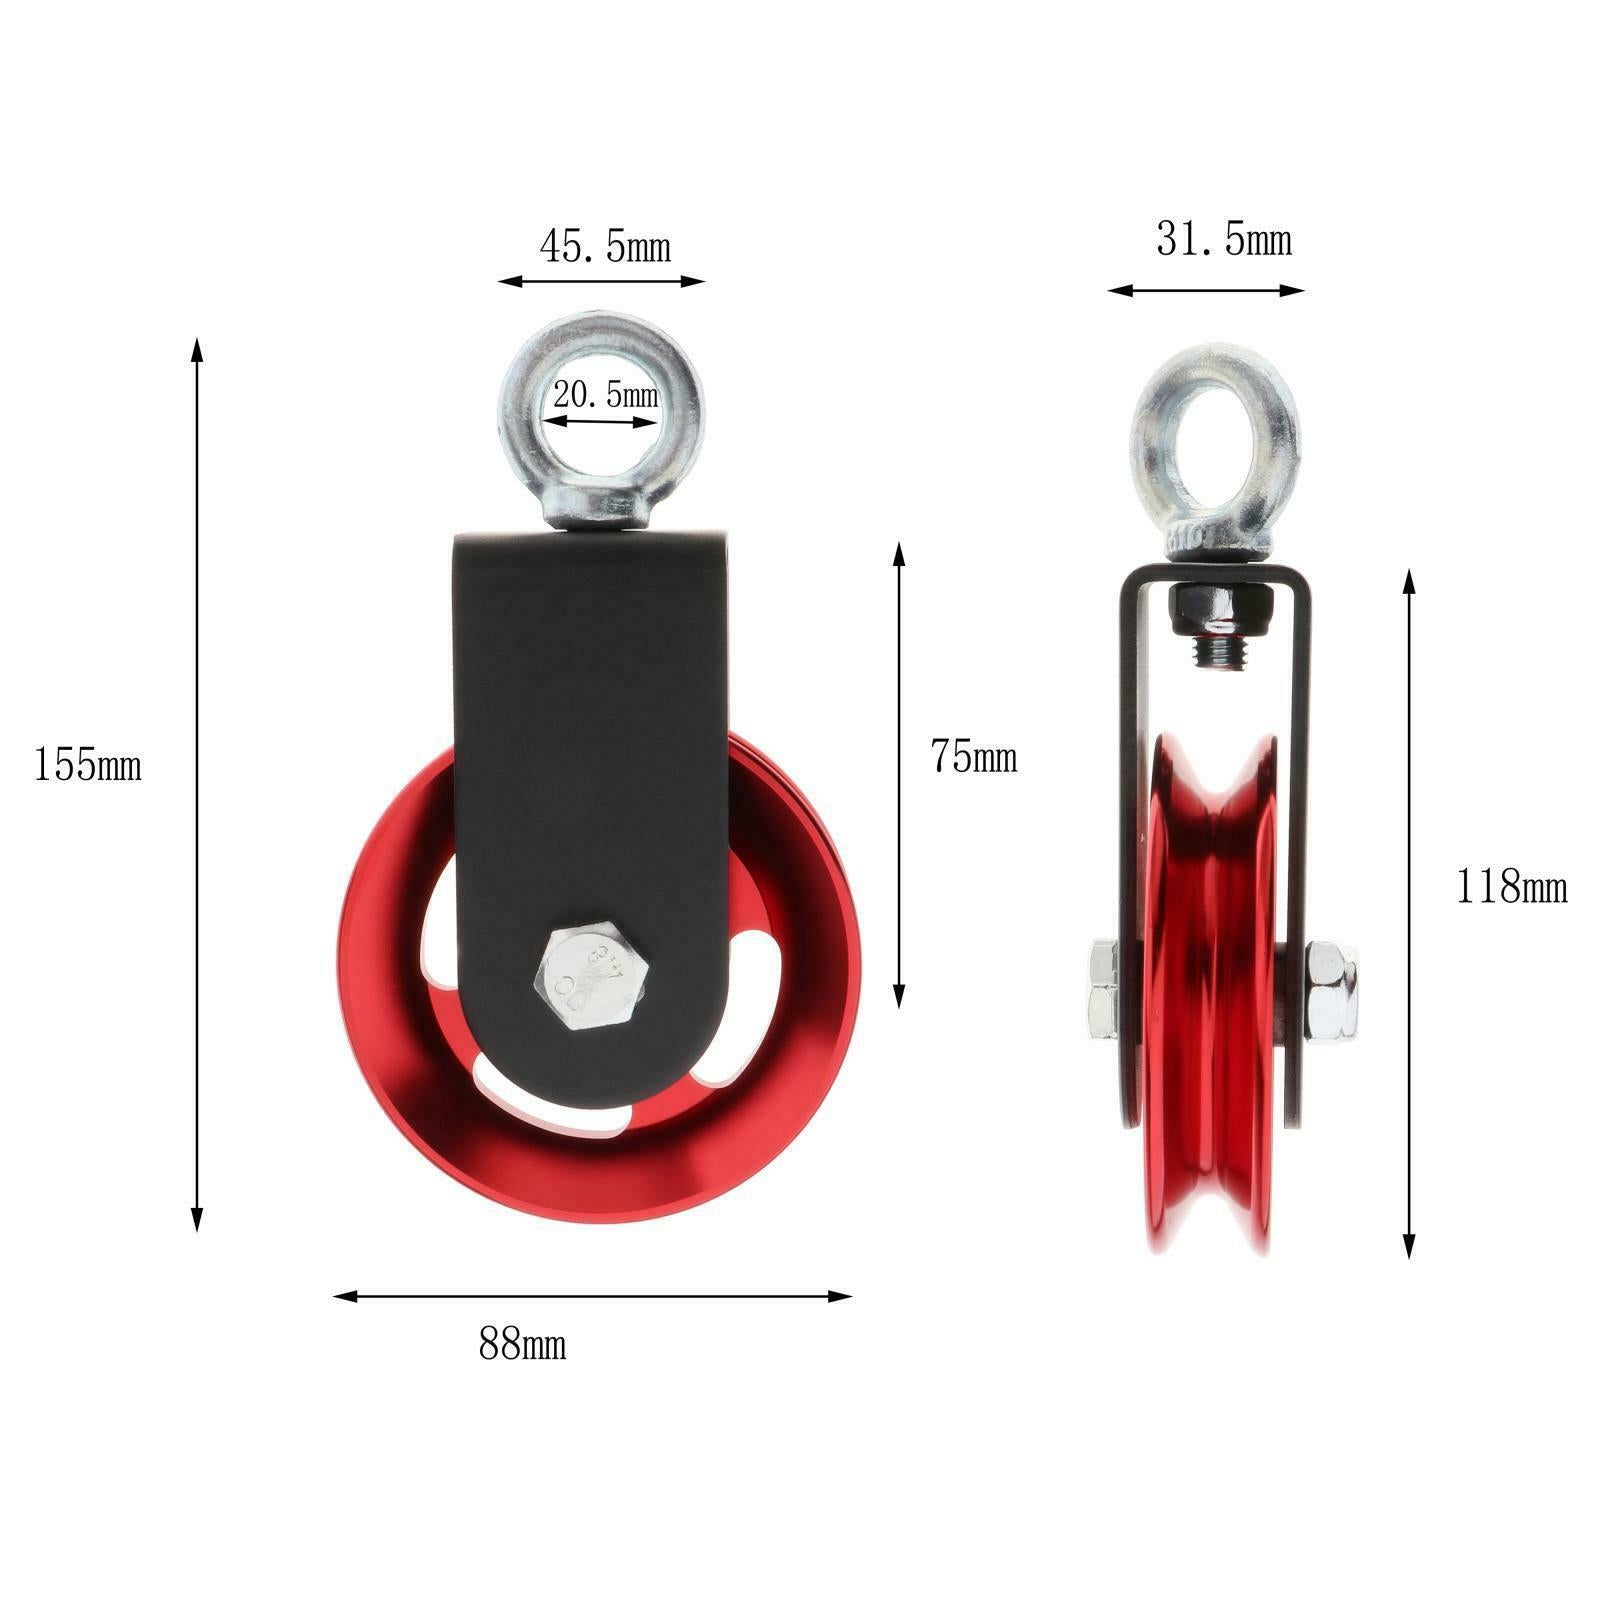 2X Aluminum Alloy Bearing Pulley Load For Lifting Cable Workout Wheel Red